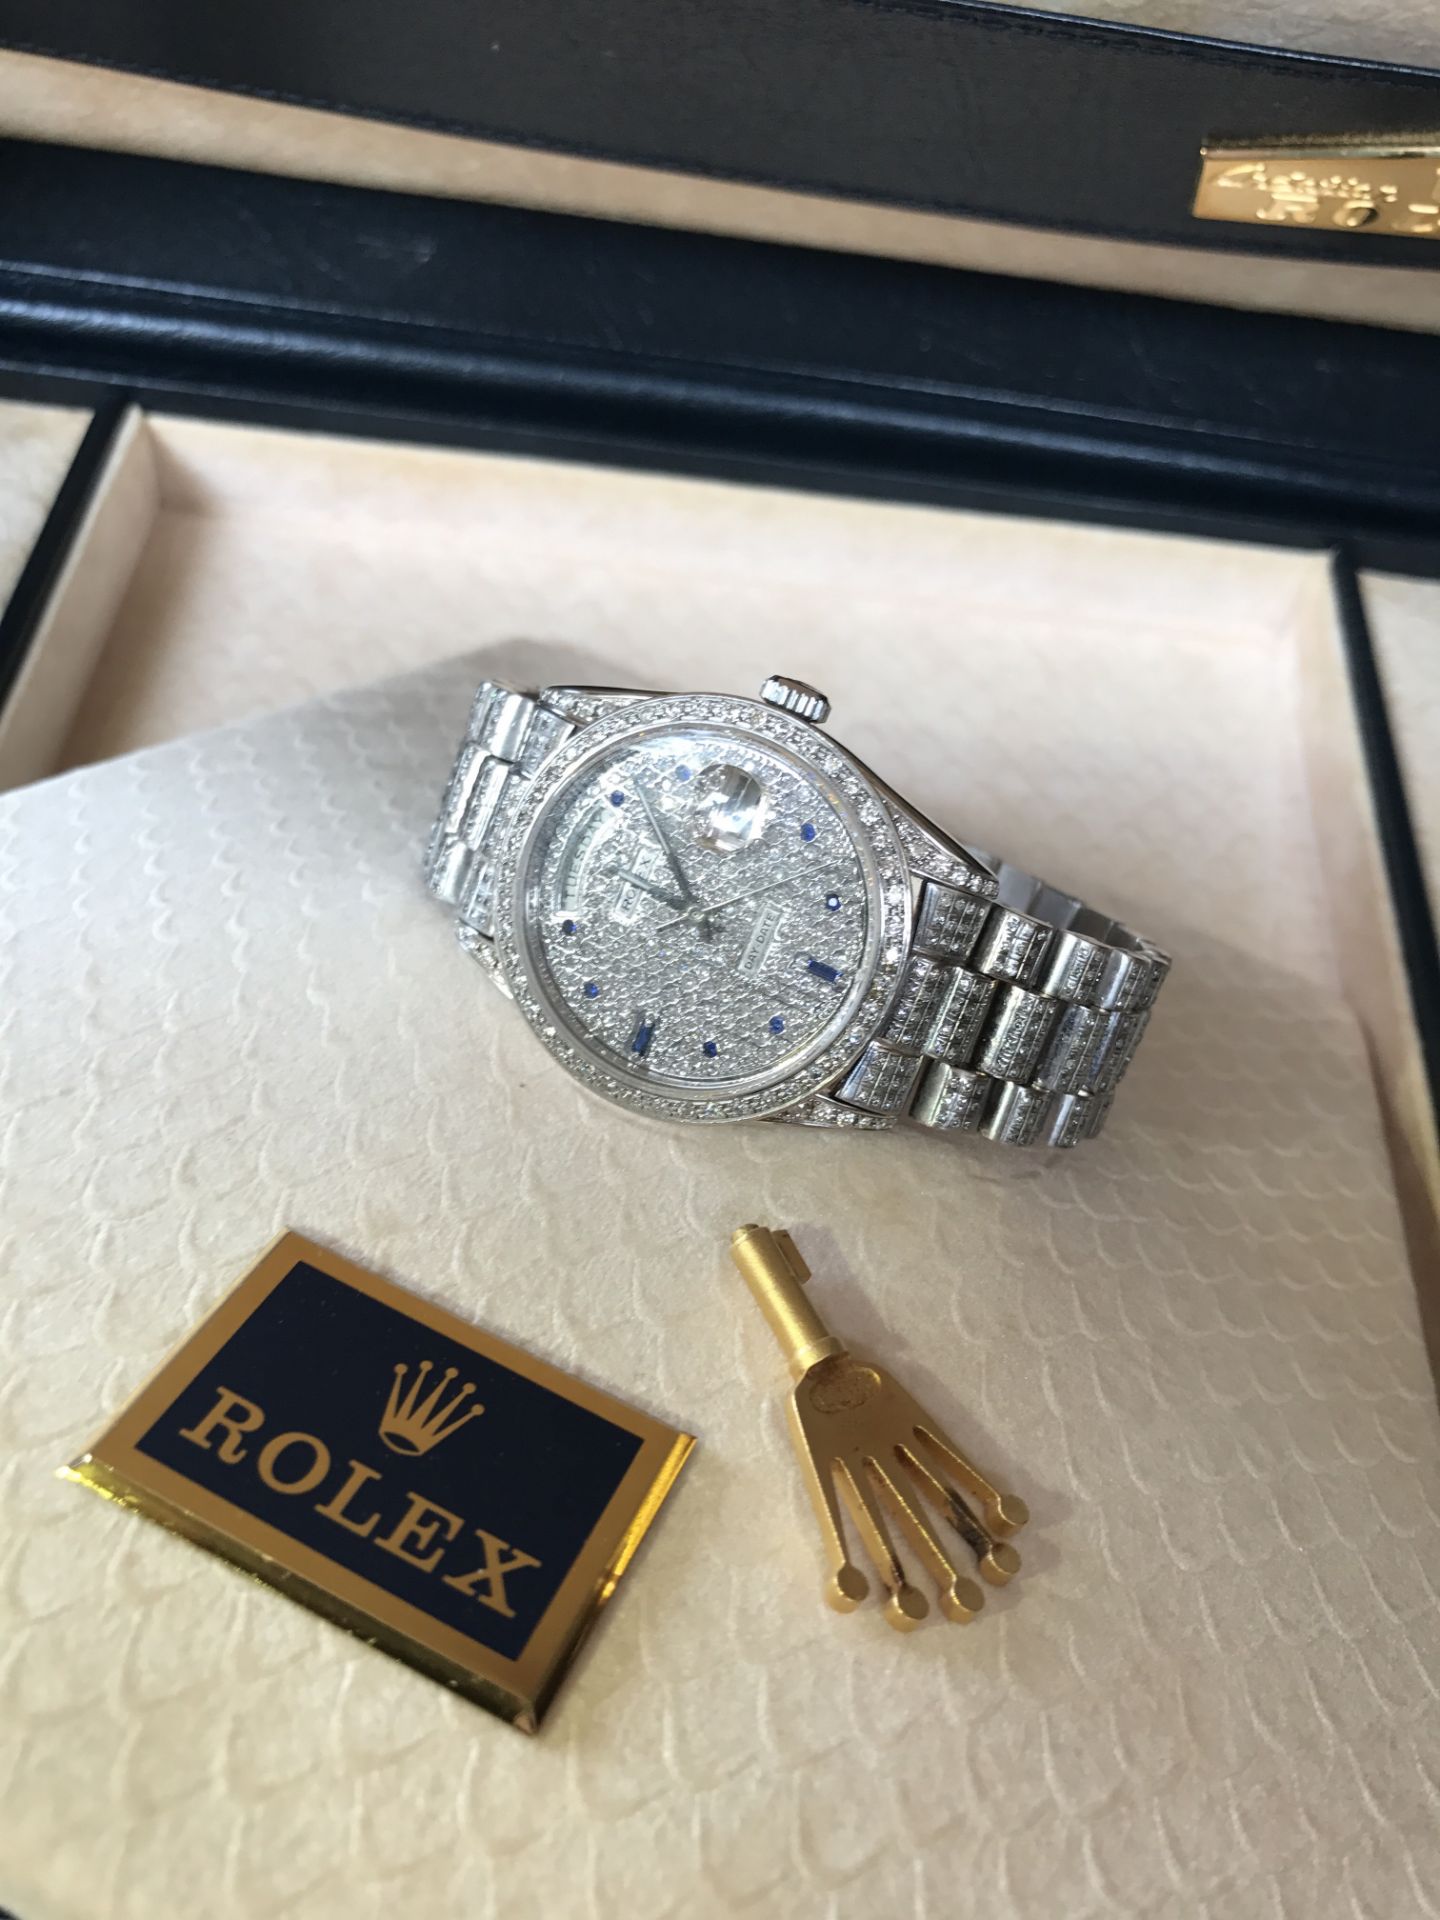 Mens Solid White Gold Diamond/ Sapphire Day-Date “Super President” Watch - Image 5 of 13